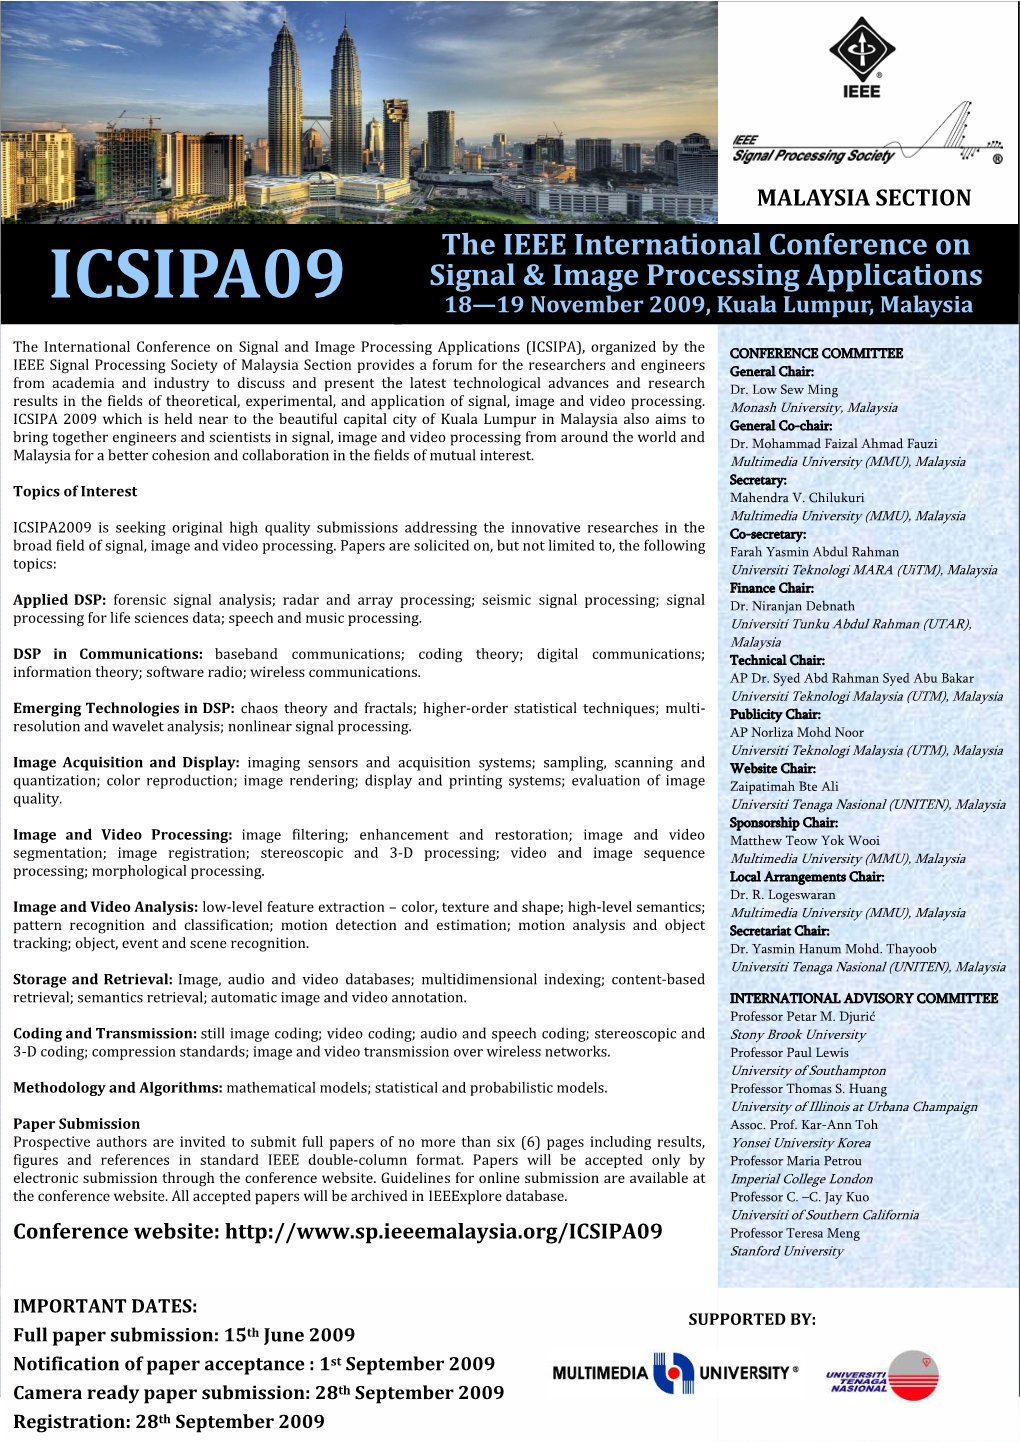 ICSIPA09 the IEEE International Conference on Signal & Image